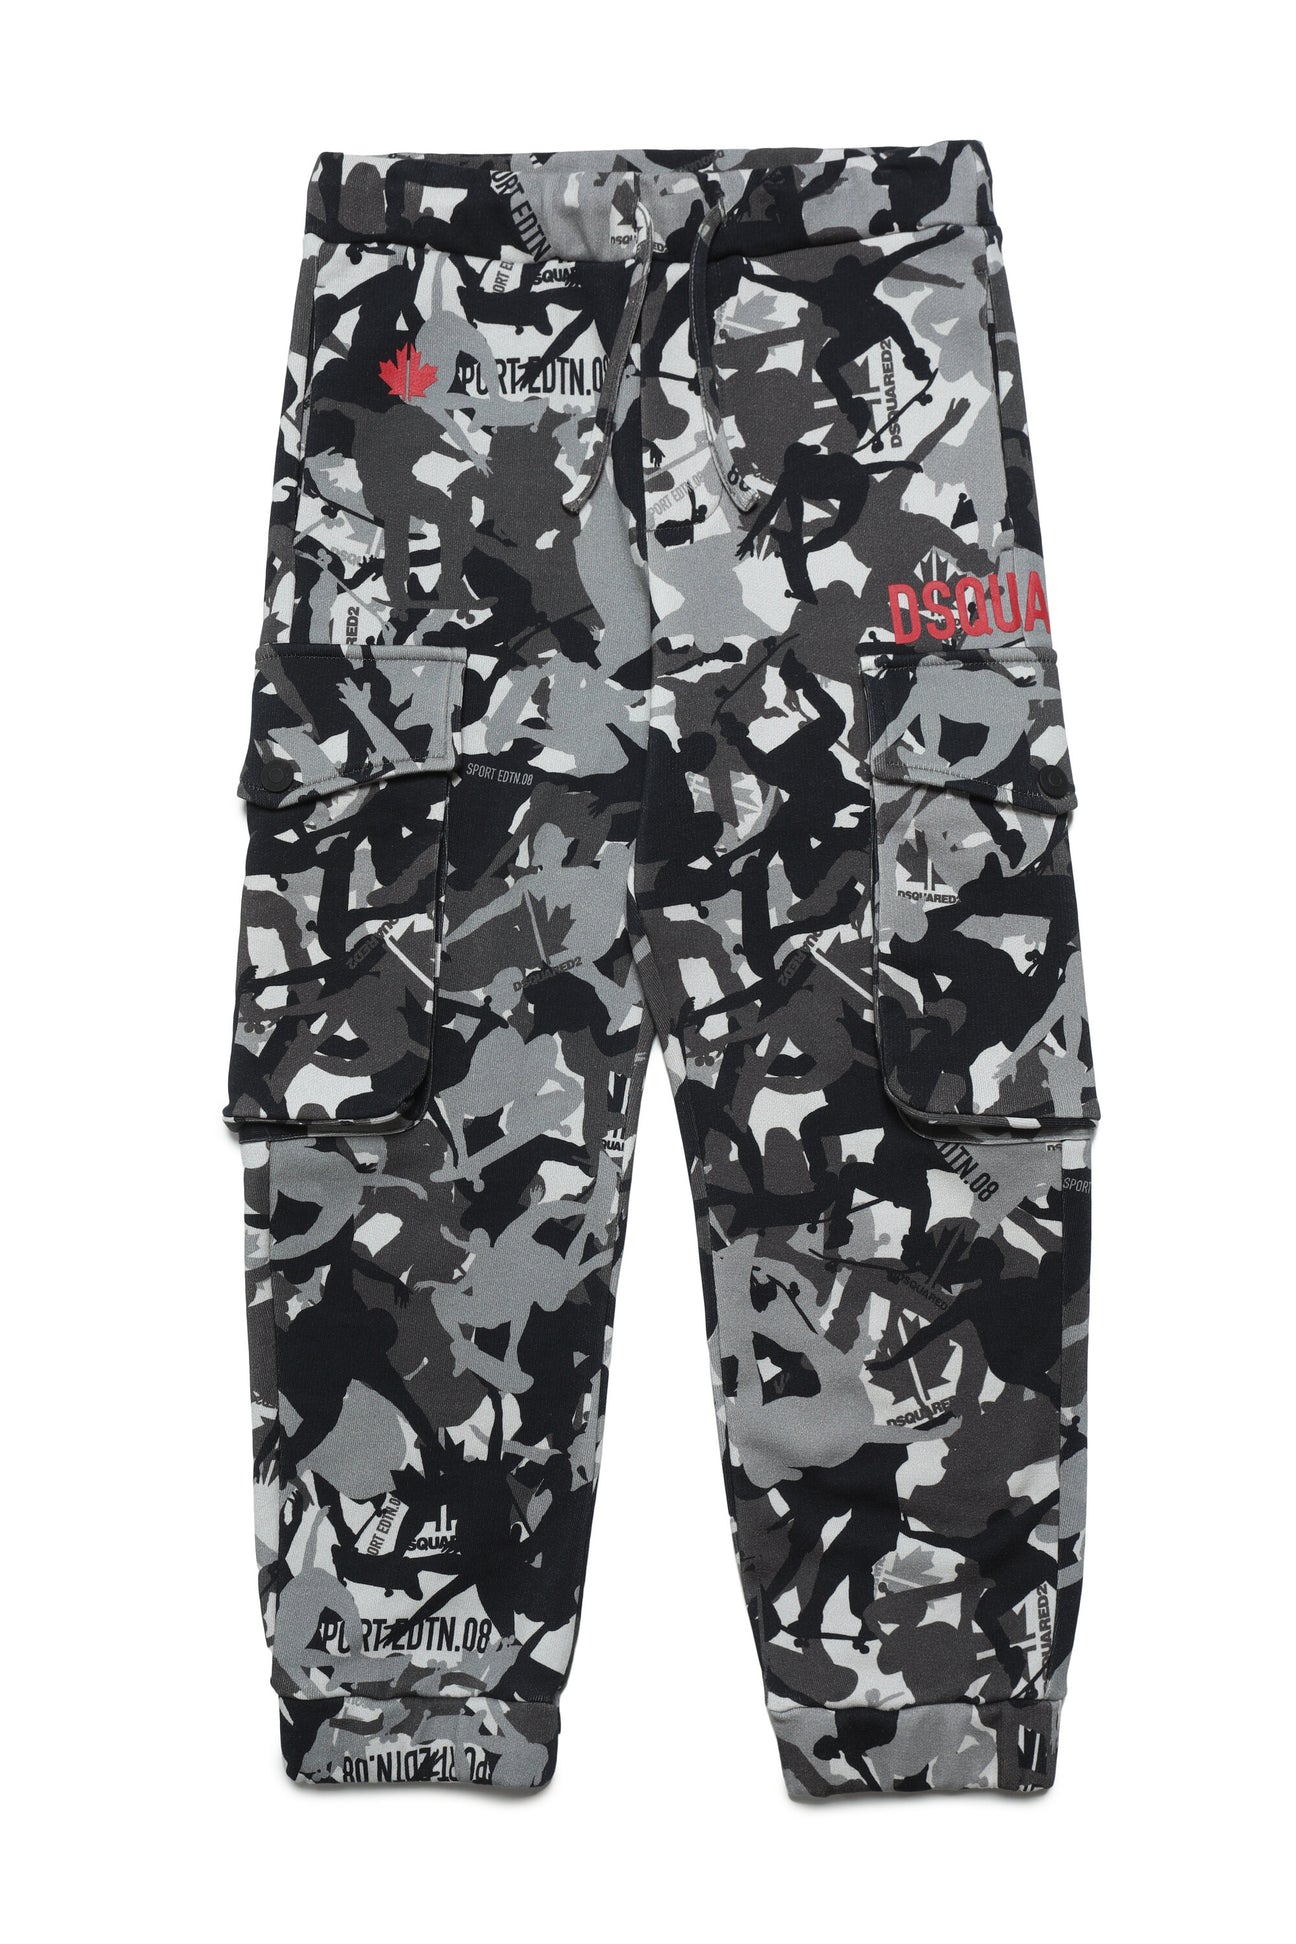 Cotton cargo pants with allover Skater Camou graphics 